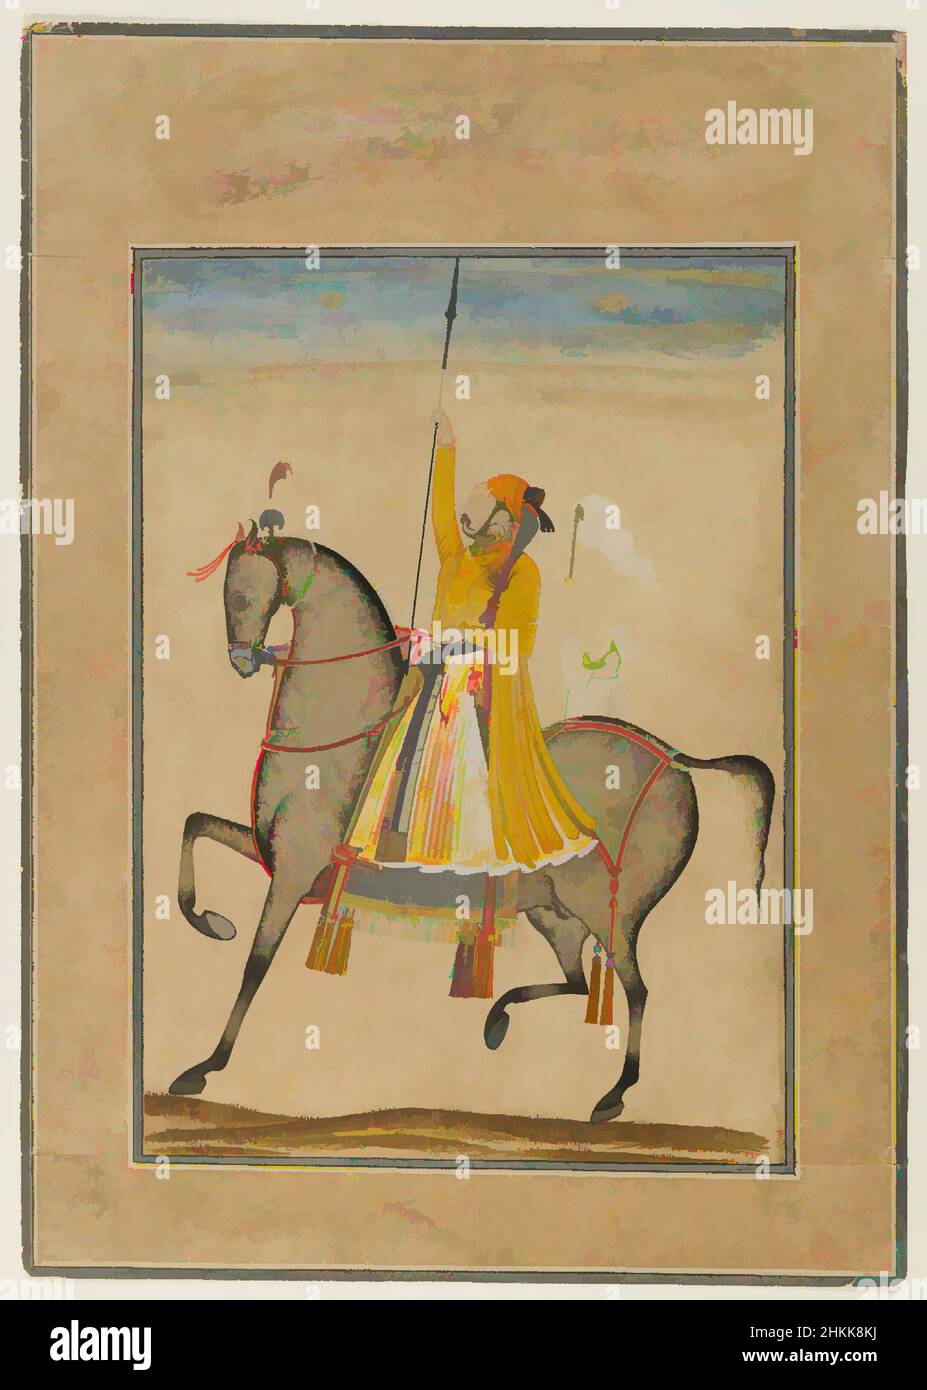 Art inspired by Equestrian Portrait of Maharaja Sujan Singh of Bikaner, Kasam, Son of Muhammad, Opaque watercolor, silver, and gold on paper, Rajasthan, India, ca. 1747, sheet: 11 1/2 x 8 1/8 in., 29.2 x 20.6 cm, Bikaner, Gold, horse, Kasam, Maharaja Sujan Singh, Paper, Portrait, Classic works modernized by Artotop with a splash of modernity. Shapes, color and value, eye-catching visual impact on art. Emotions through freedom of artworks in a contemporary way. A timeless message pursuing a wildly creative new direction. Artists turning to the digital medium and creating the Artotop NFT Stock Photo